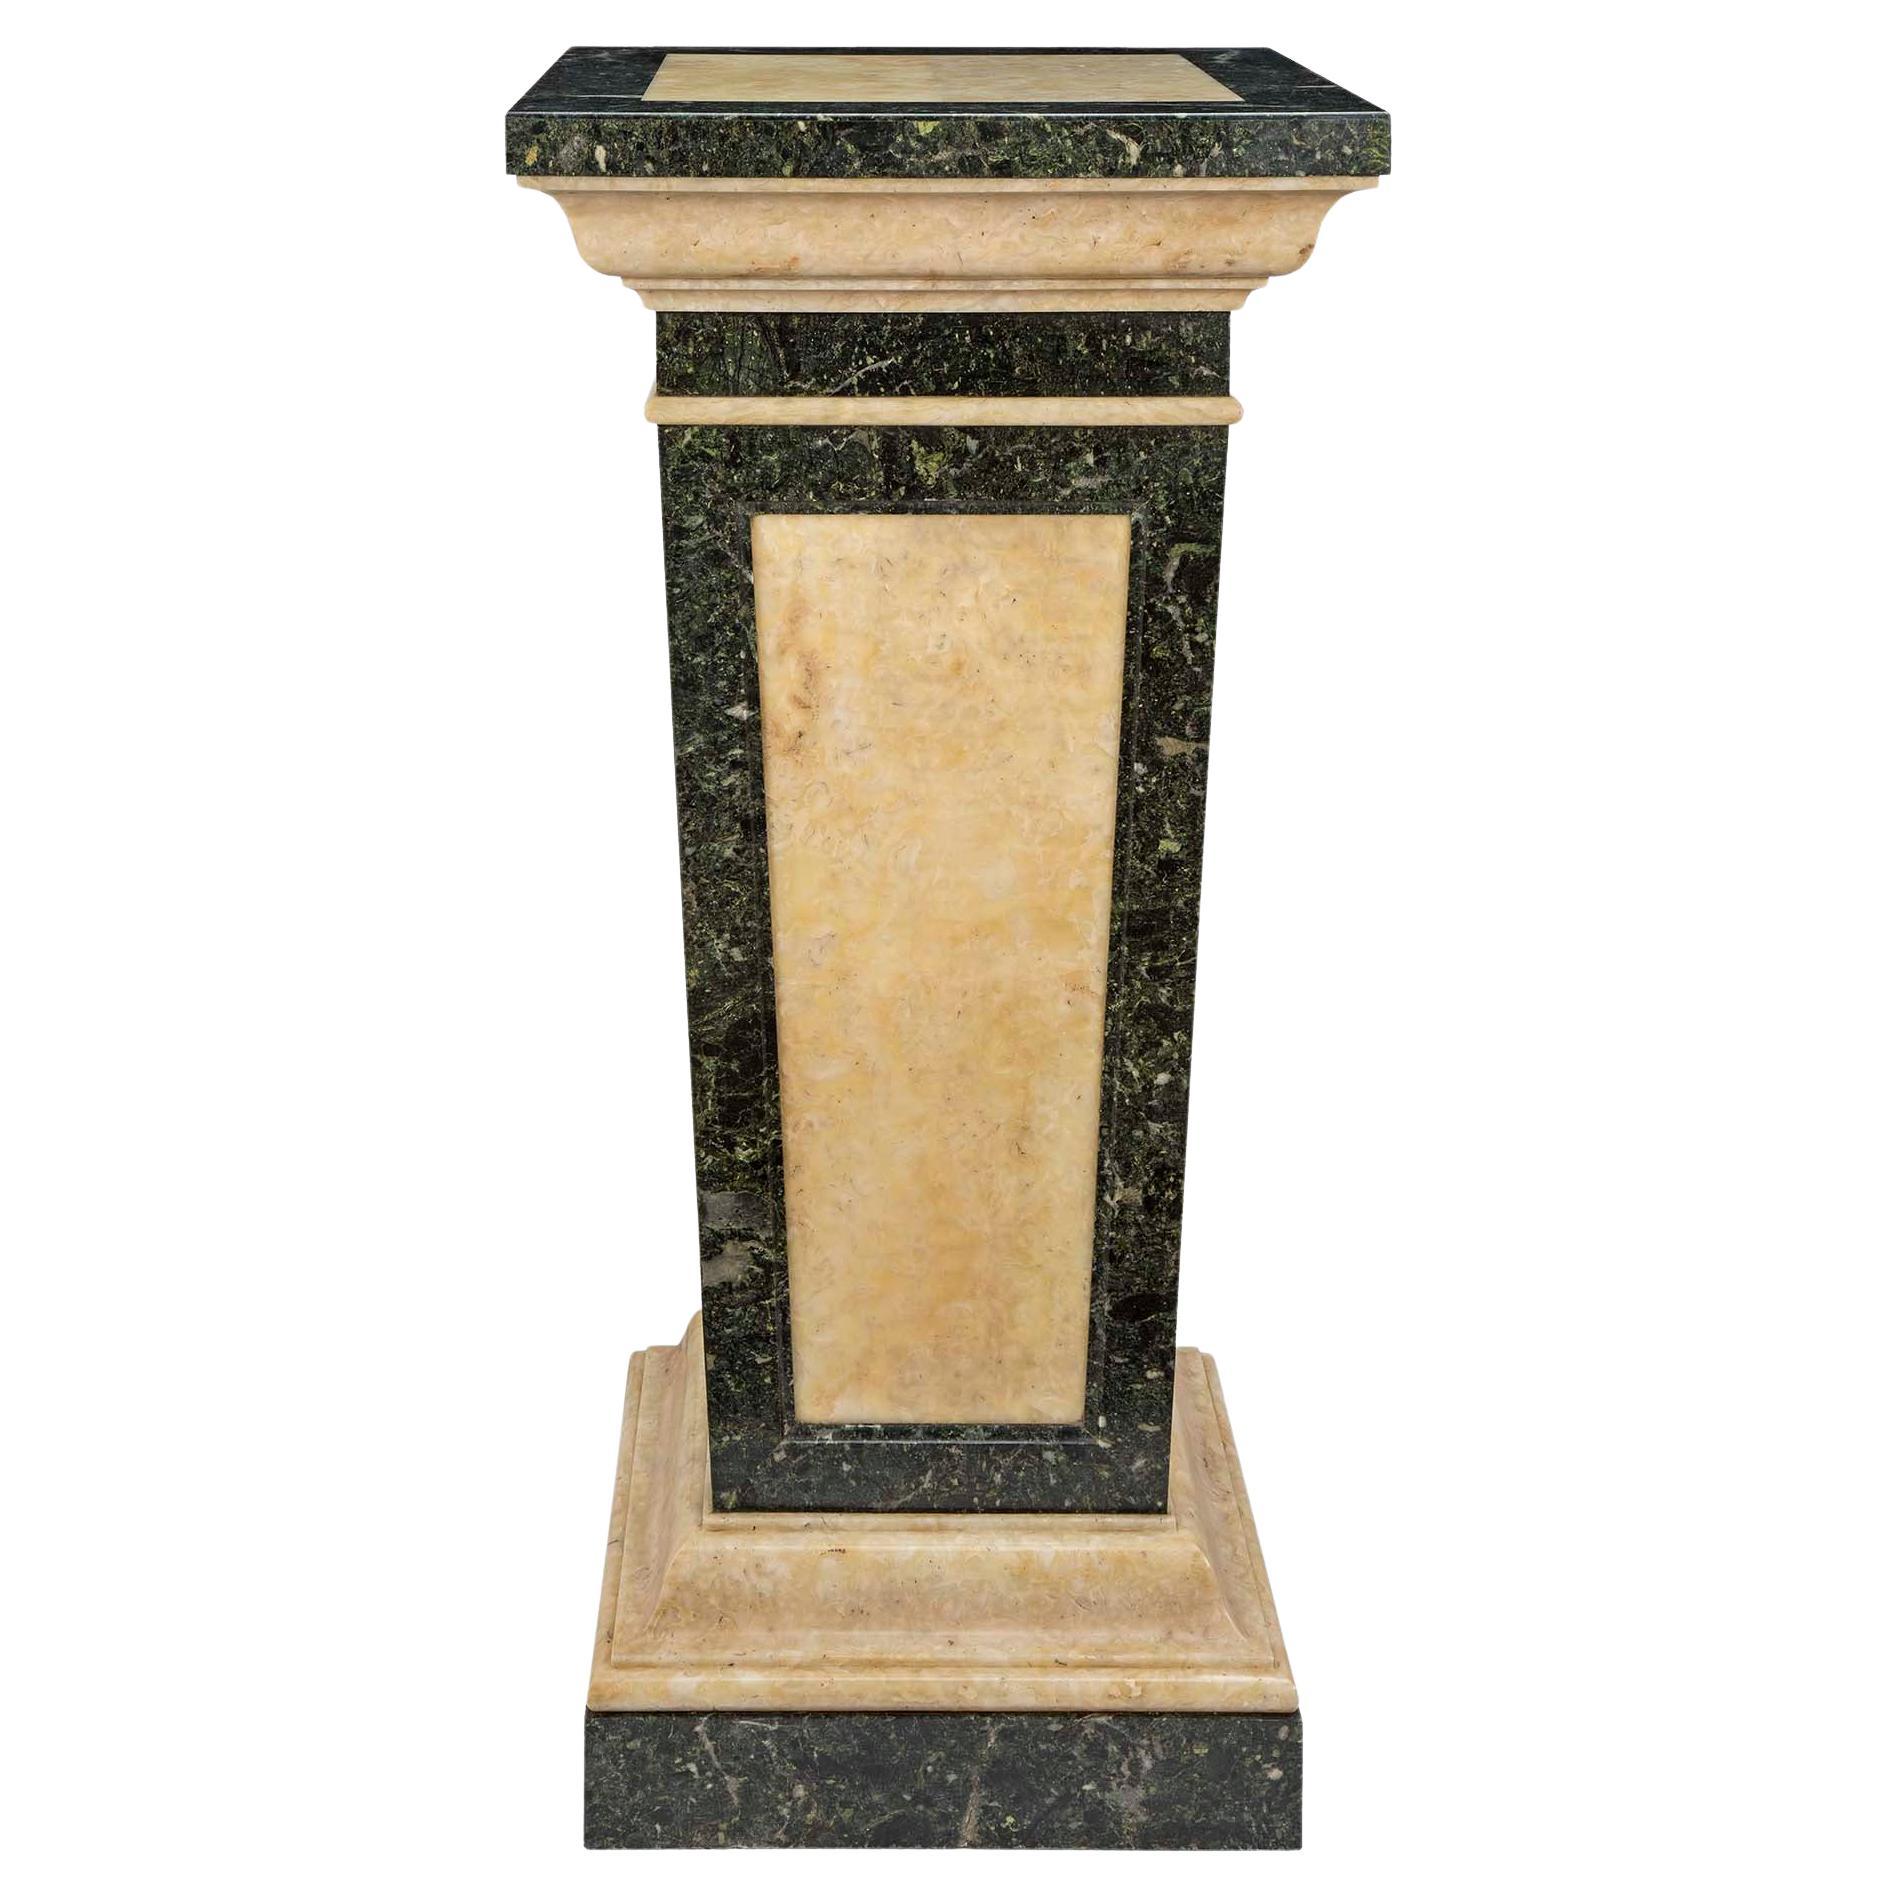 Italian Late 19th Century Neoclassical Style Alabaster and Marble Pedestal